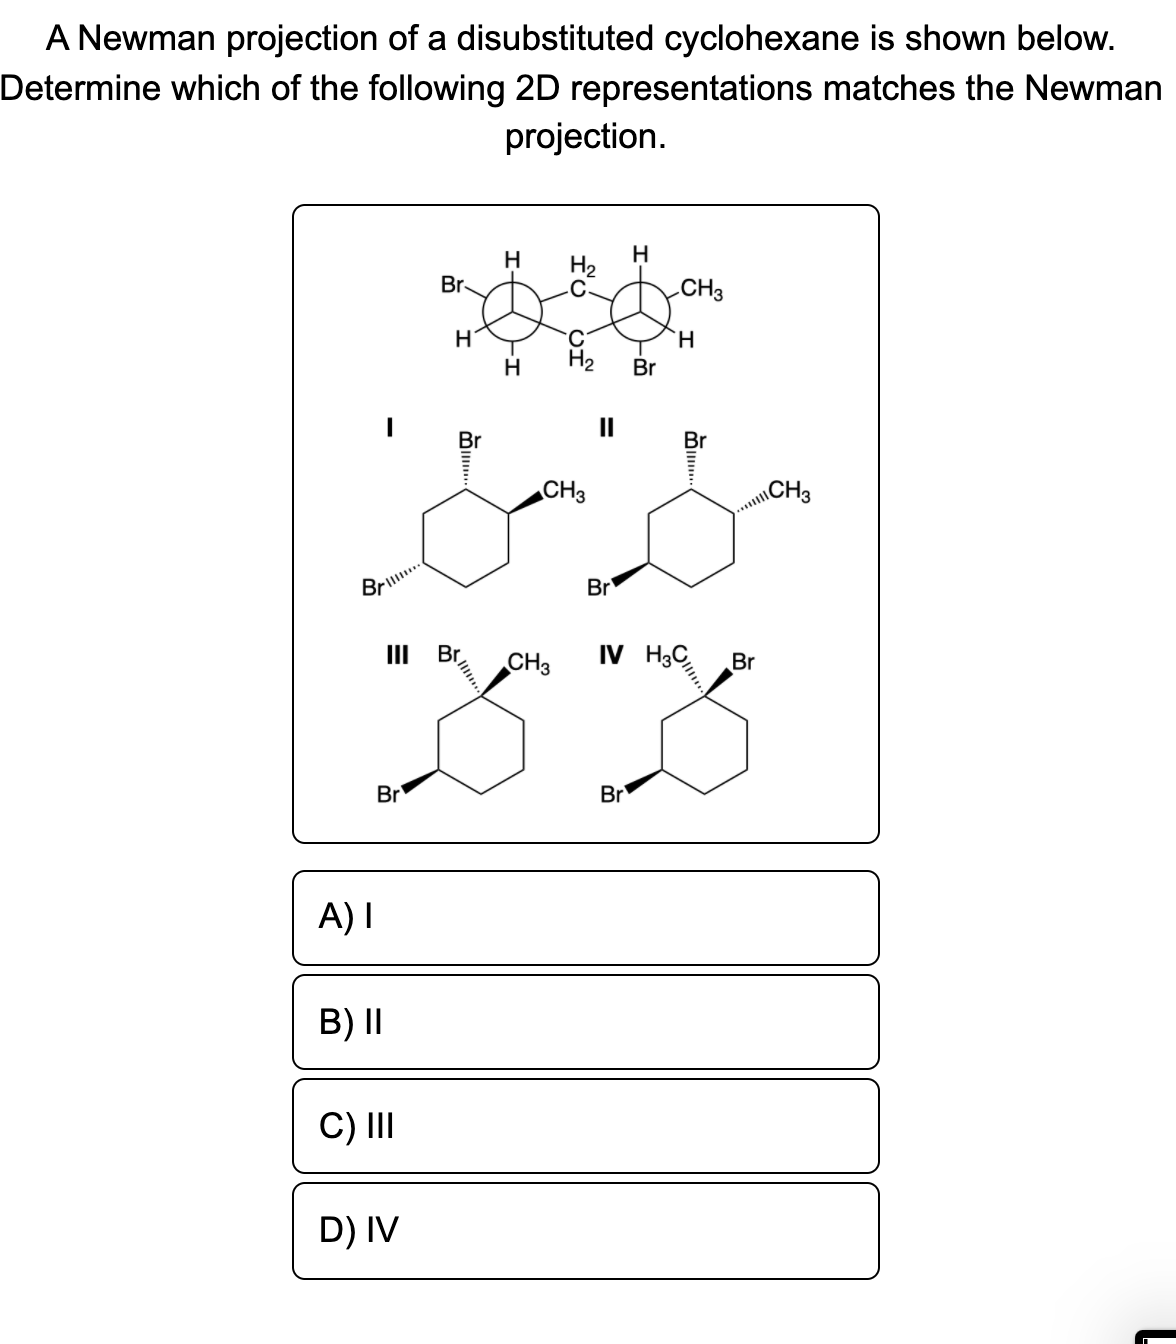 A Newman projection of a disubstituted cyclohexane is shown below.
Determine which of the following 2D representations matches the Newman
projection.
H
Br
H
H2
CH3
`H
H
H2
Br
II
Br
CH3
\CH3
Brill.
Br
Br
IV H3
II
CH3
Br
Br
Br
A) I
B) II
C) II
D) IV
